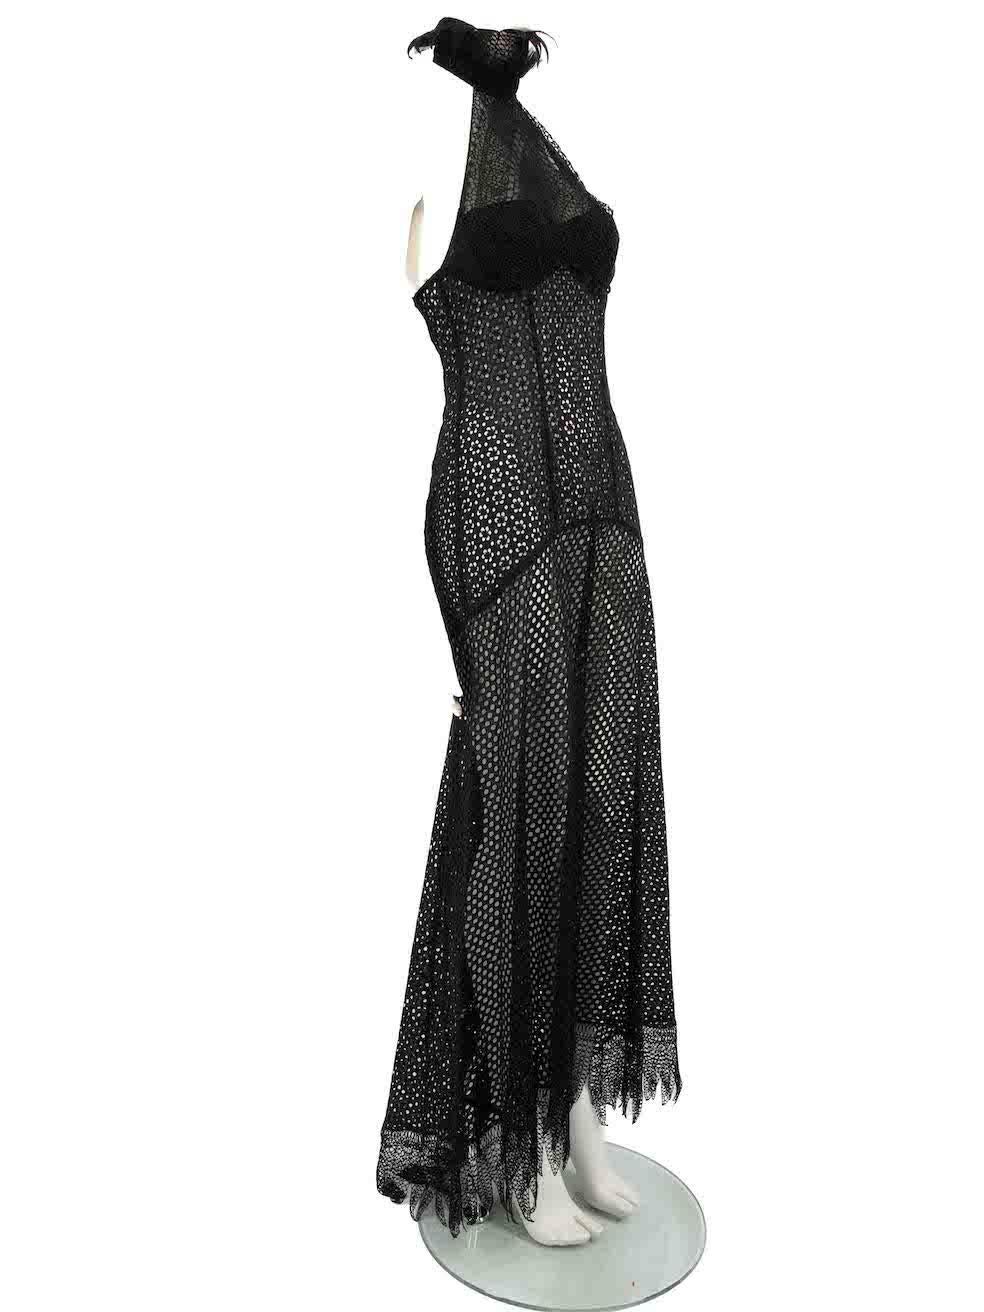 CONDITION is Very good. Minimal wear to dress is evident. Minimal wear to the hem, with holes to the broderie anglaise. The composition label is missing on this used La Perla designer resale item.
 
 
 
 Details
 
 
 Black
 
 Cotton
 
 Maxi dress
 
